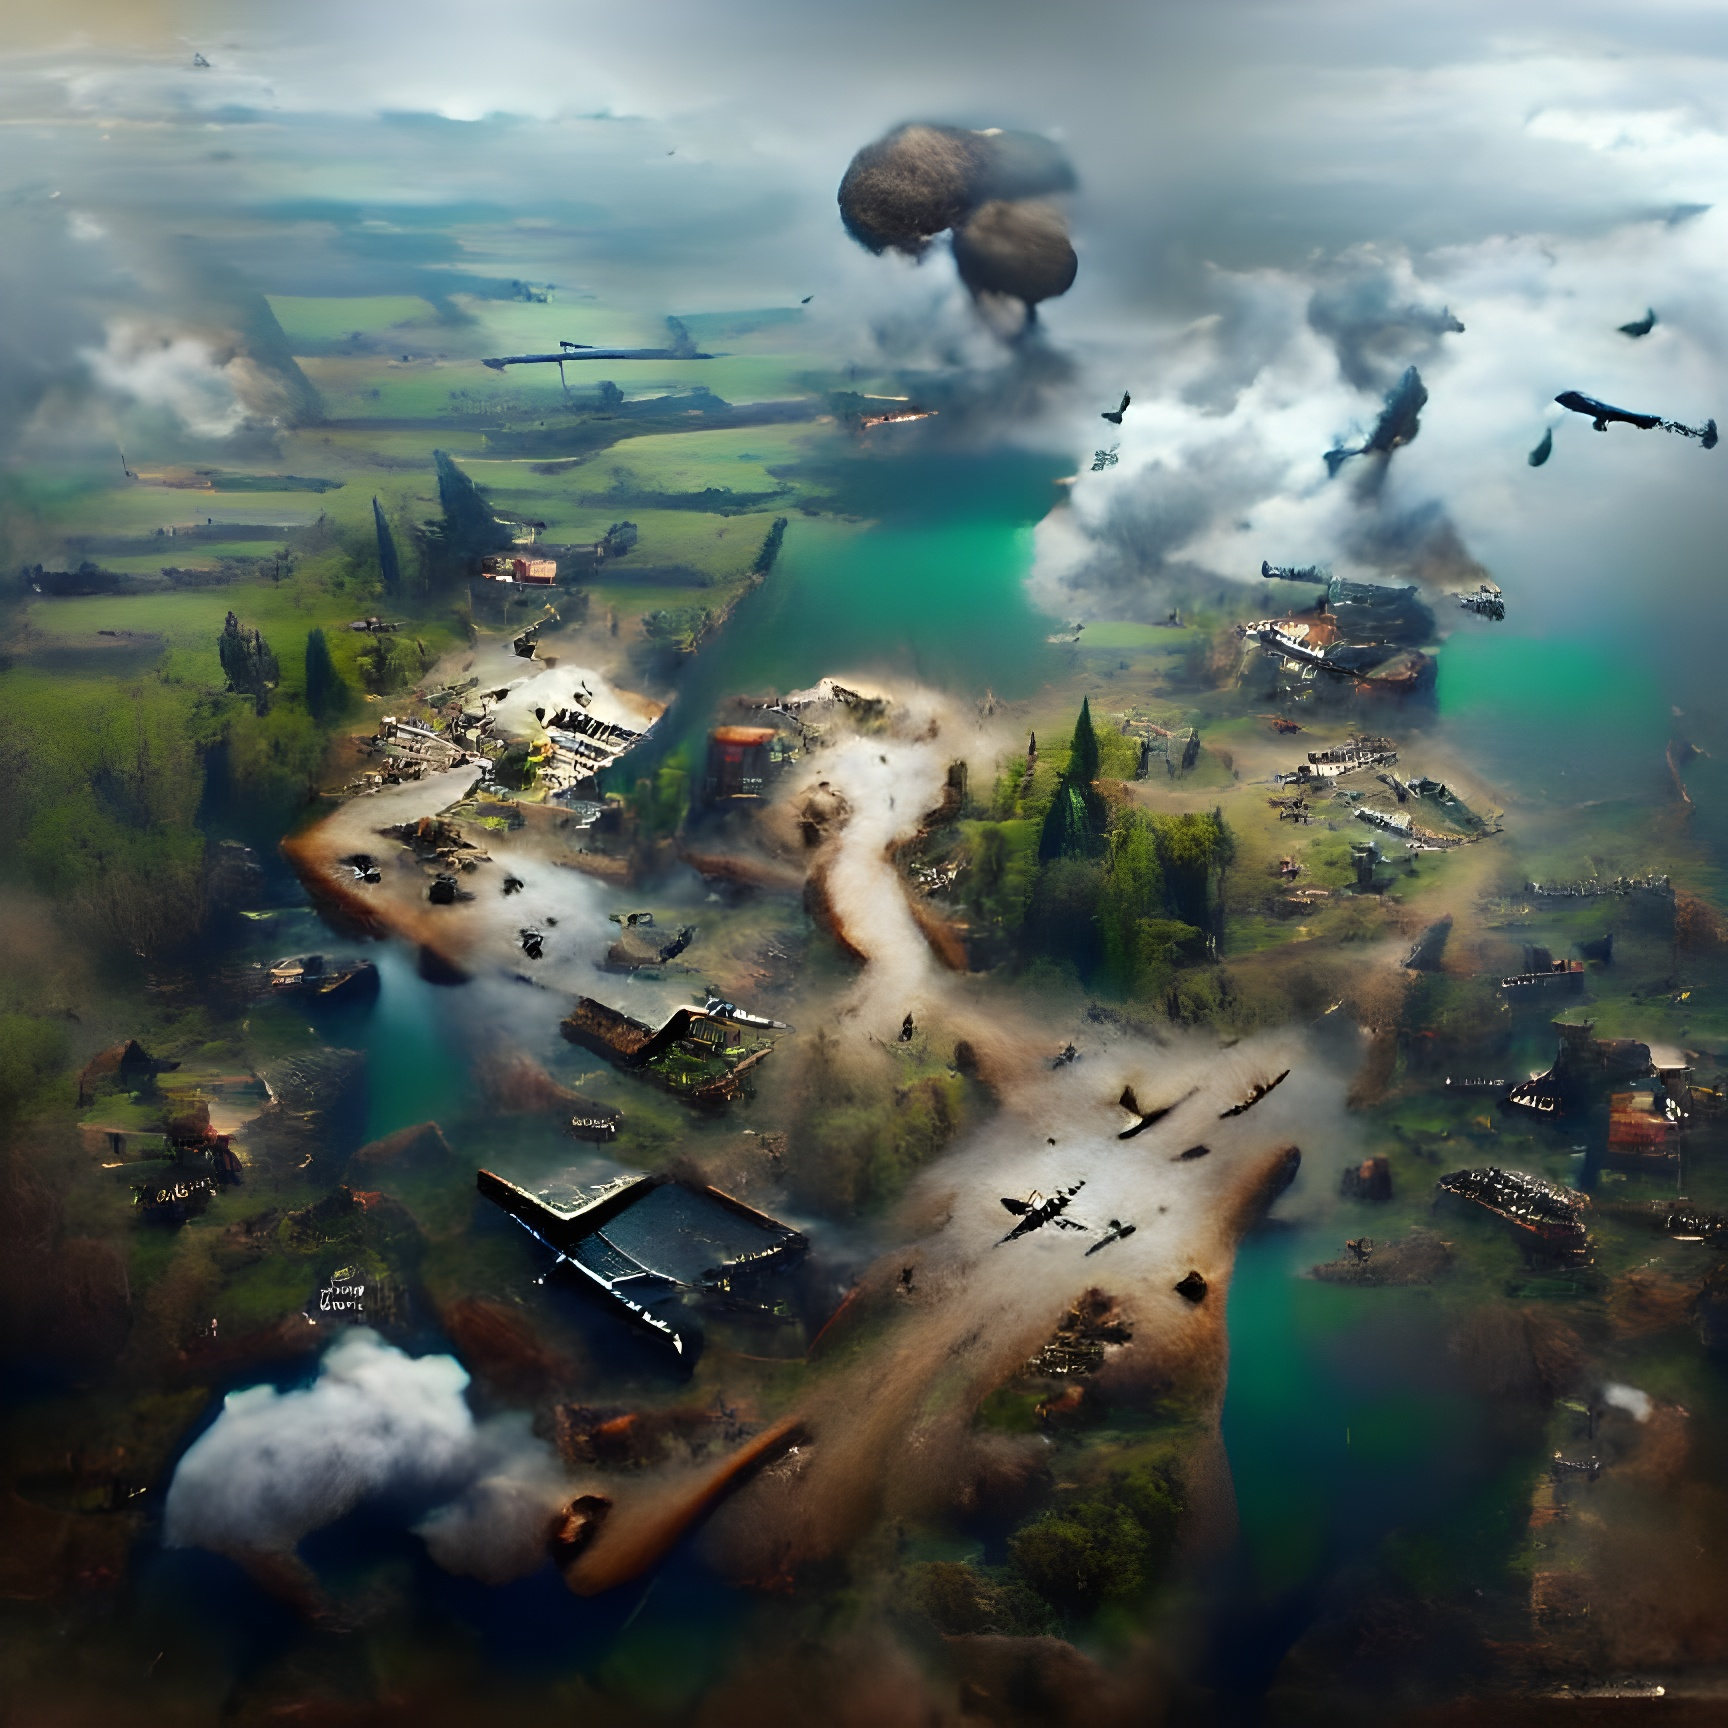 War From Above #2